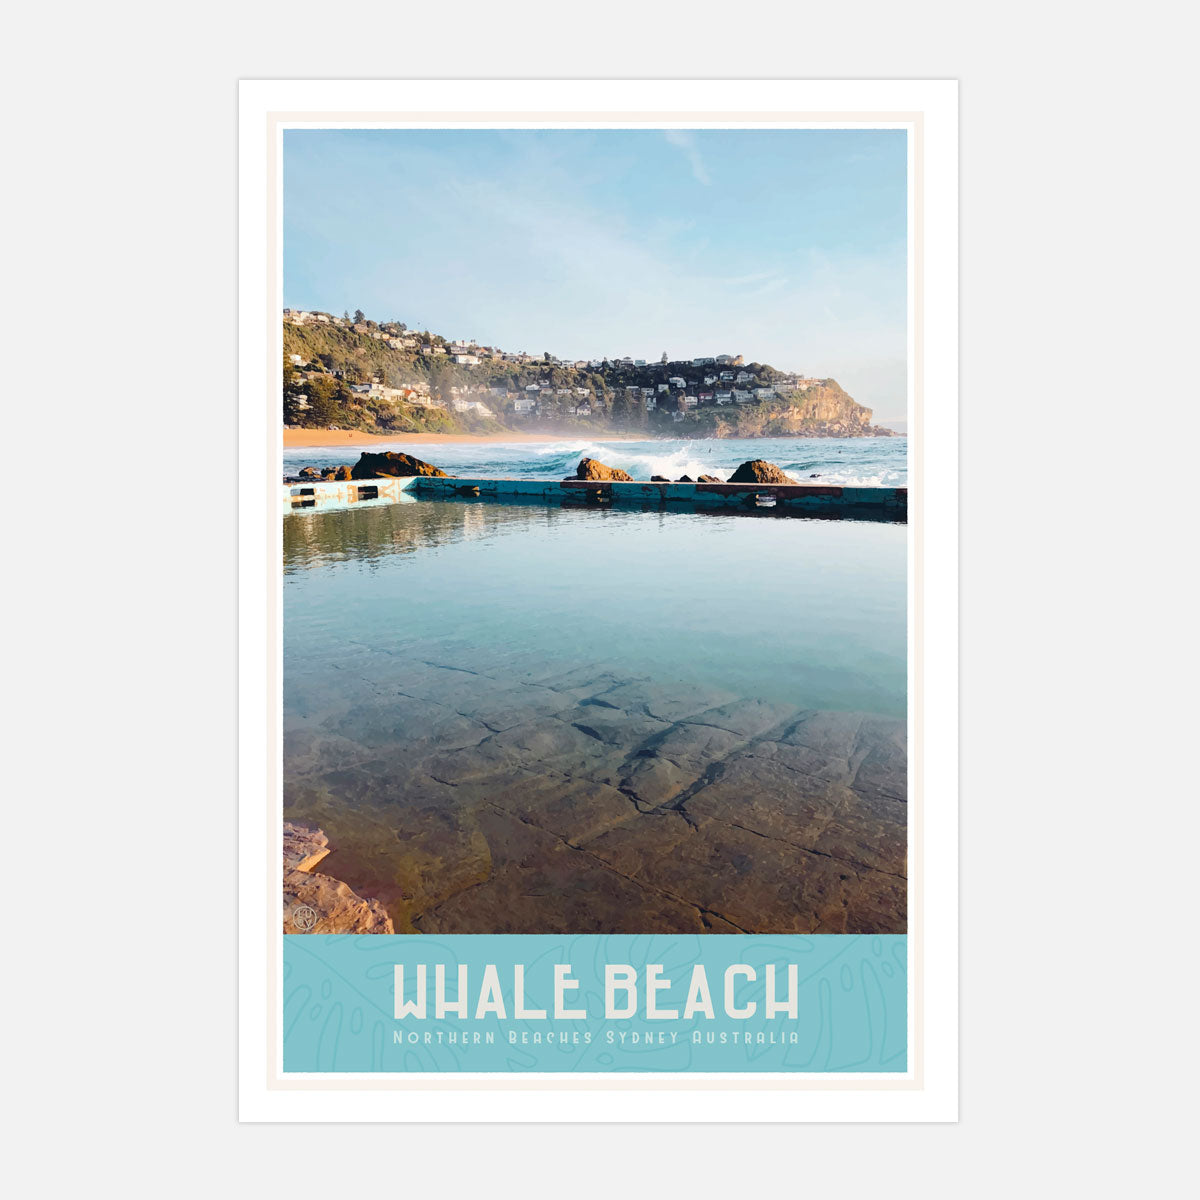 Whale Beach NSW vintage style travel poster - Places we luv